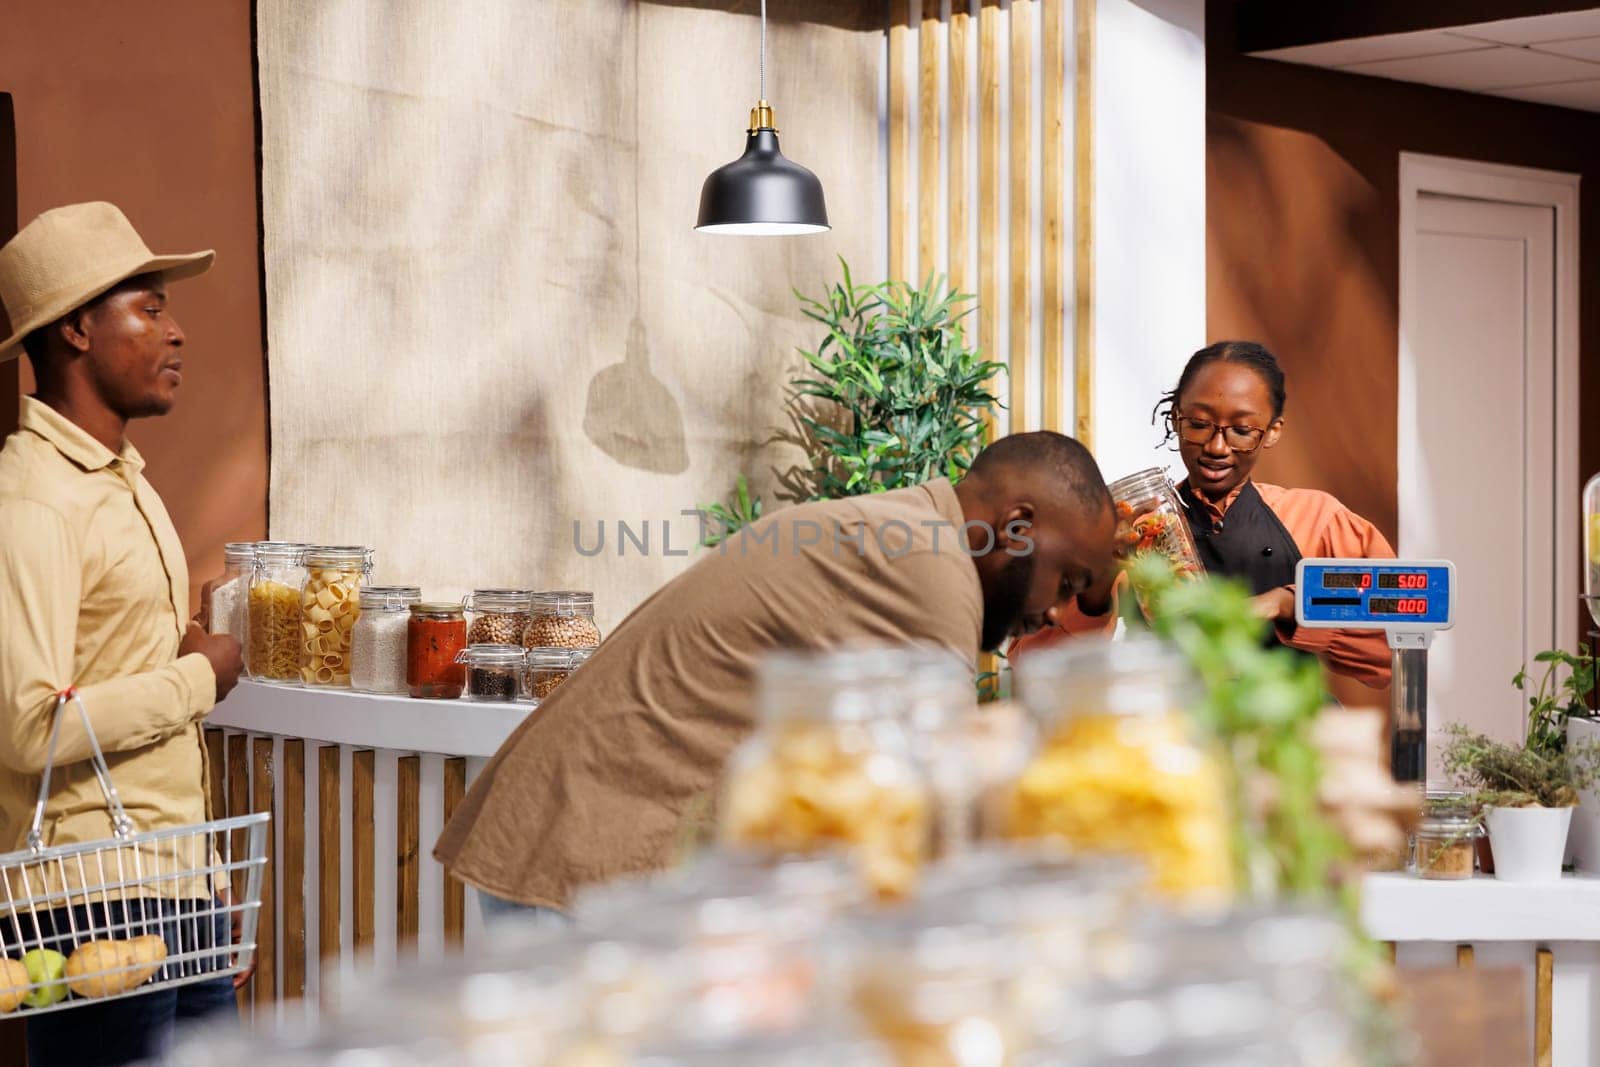 Black man wearing hat waits in line while female cashier assists with packaging of products of another male customer. Image shows African American clients at checkout counter of eco friendly store.